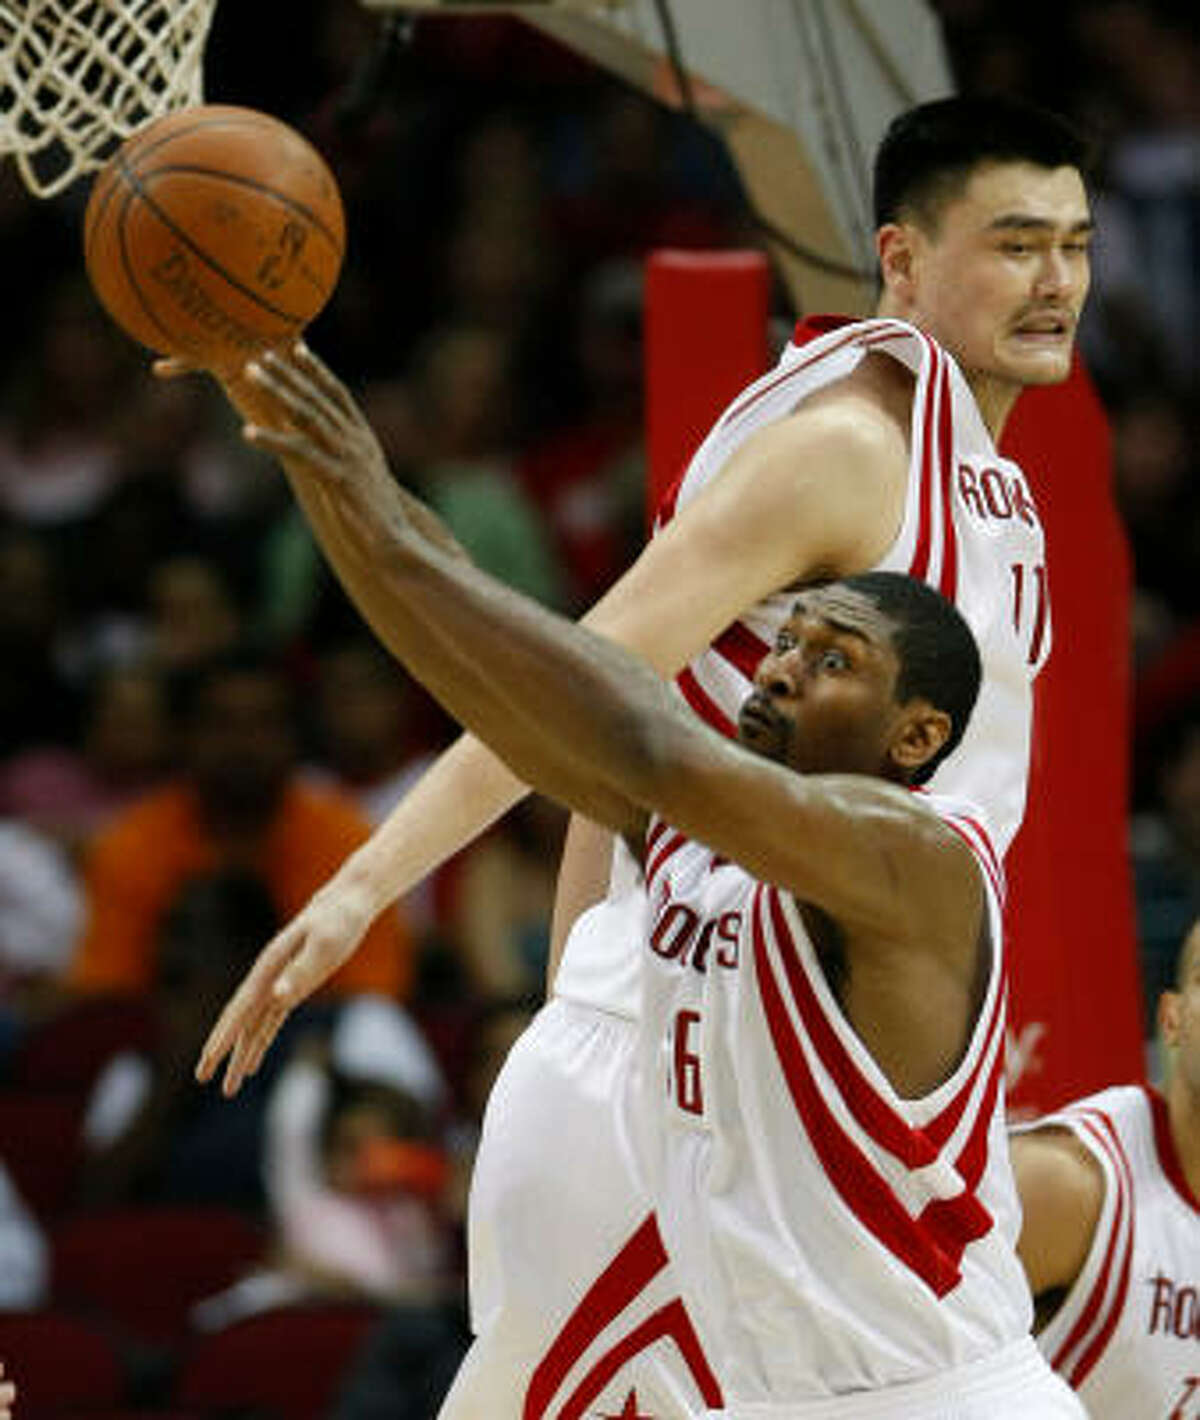 While ﻿regarded as two of the Rockets’ best players, neither Ron Artest, bottom, nor Yao Ming, top, have established themselves as the team’s singular leader.